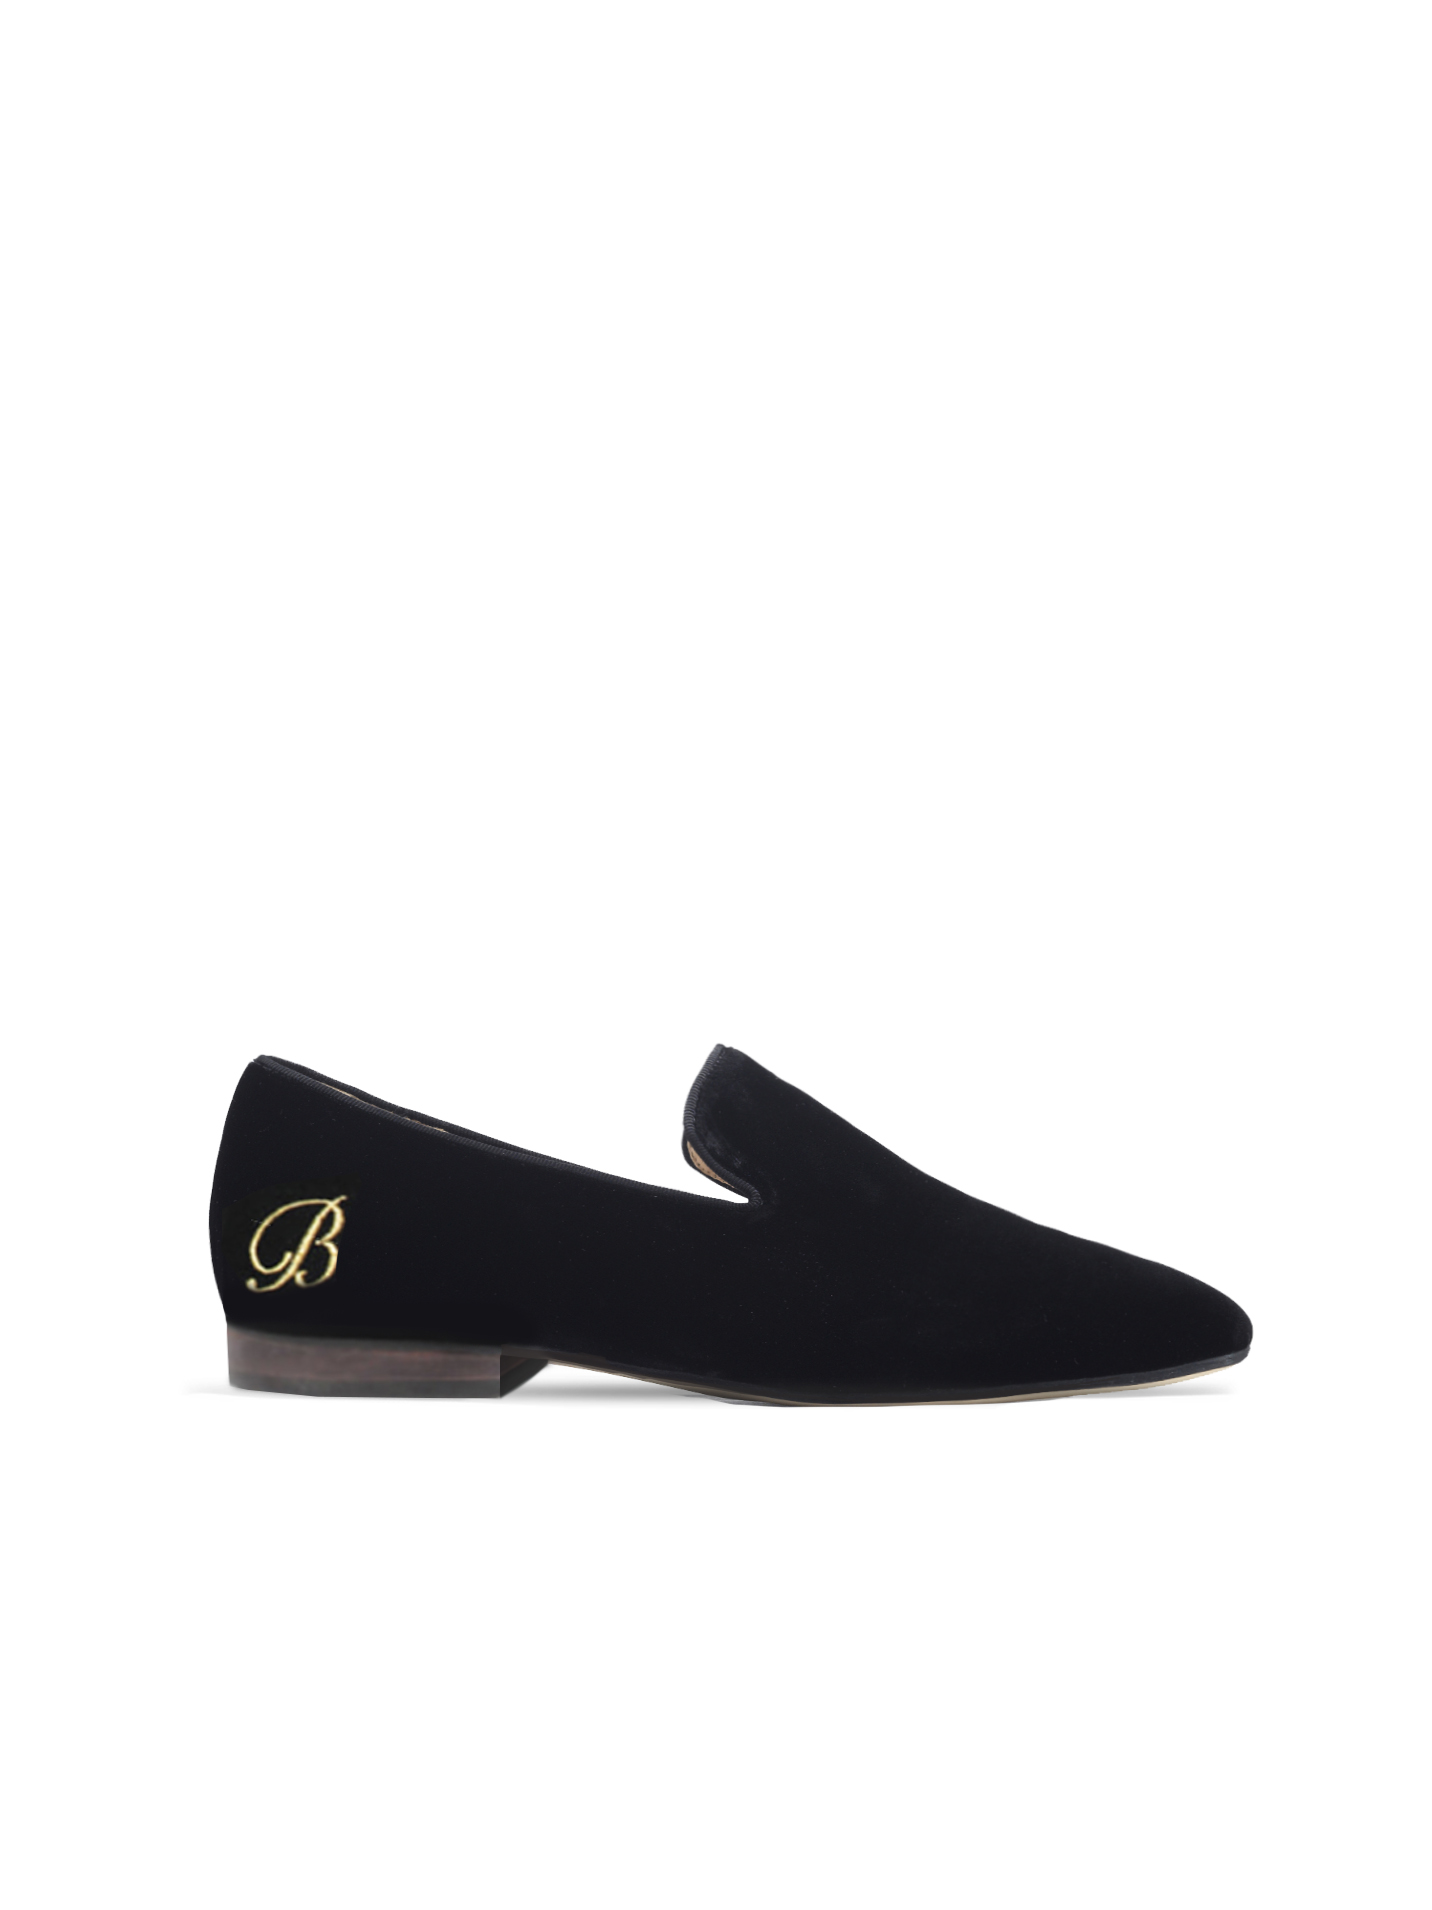 B initial loafer